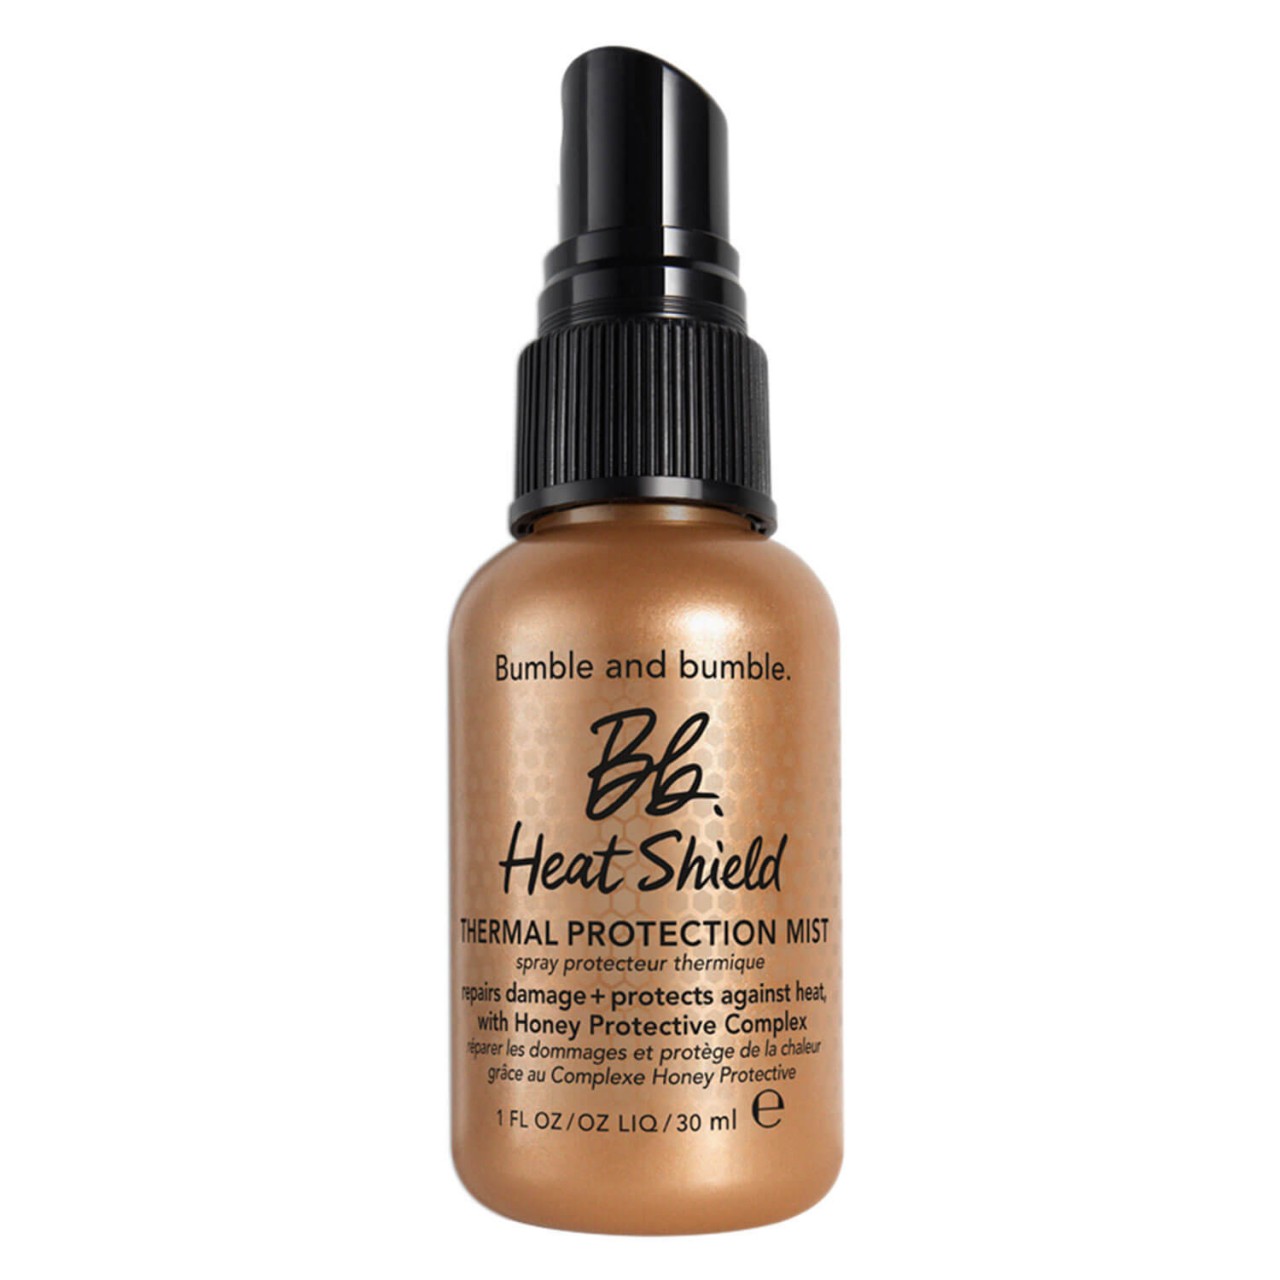 Bb. Styling - Heat Shield Thermal Protection Mist von Bumble and bumble.